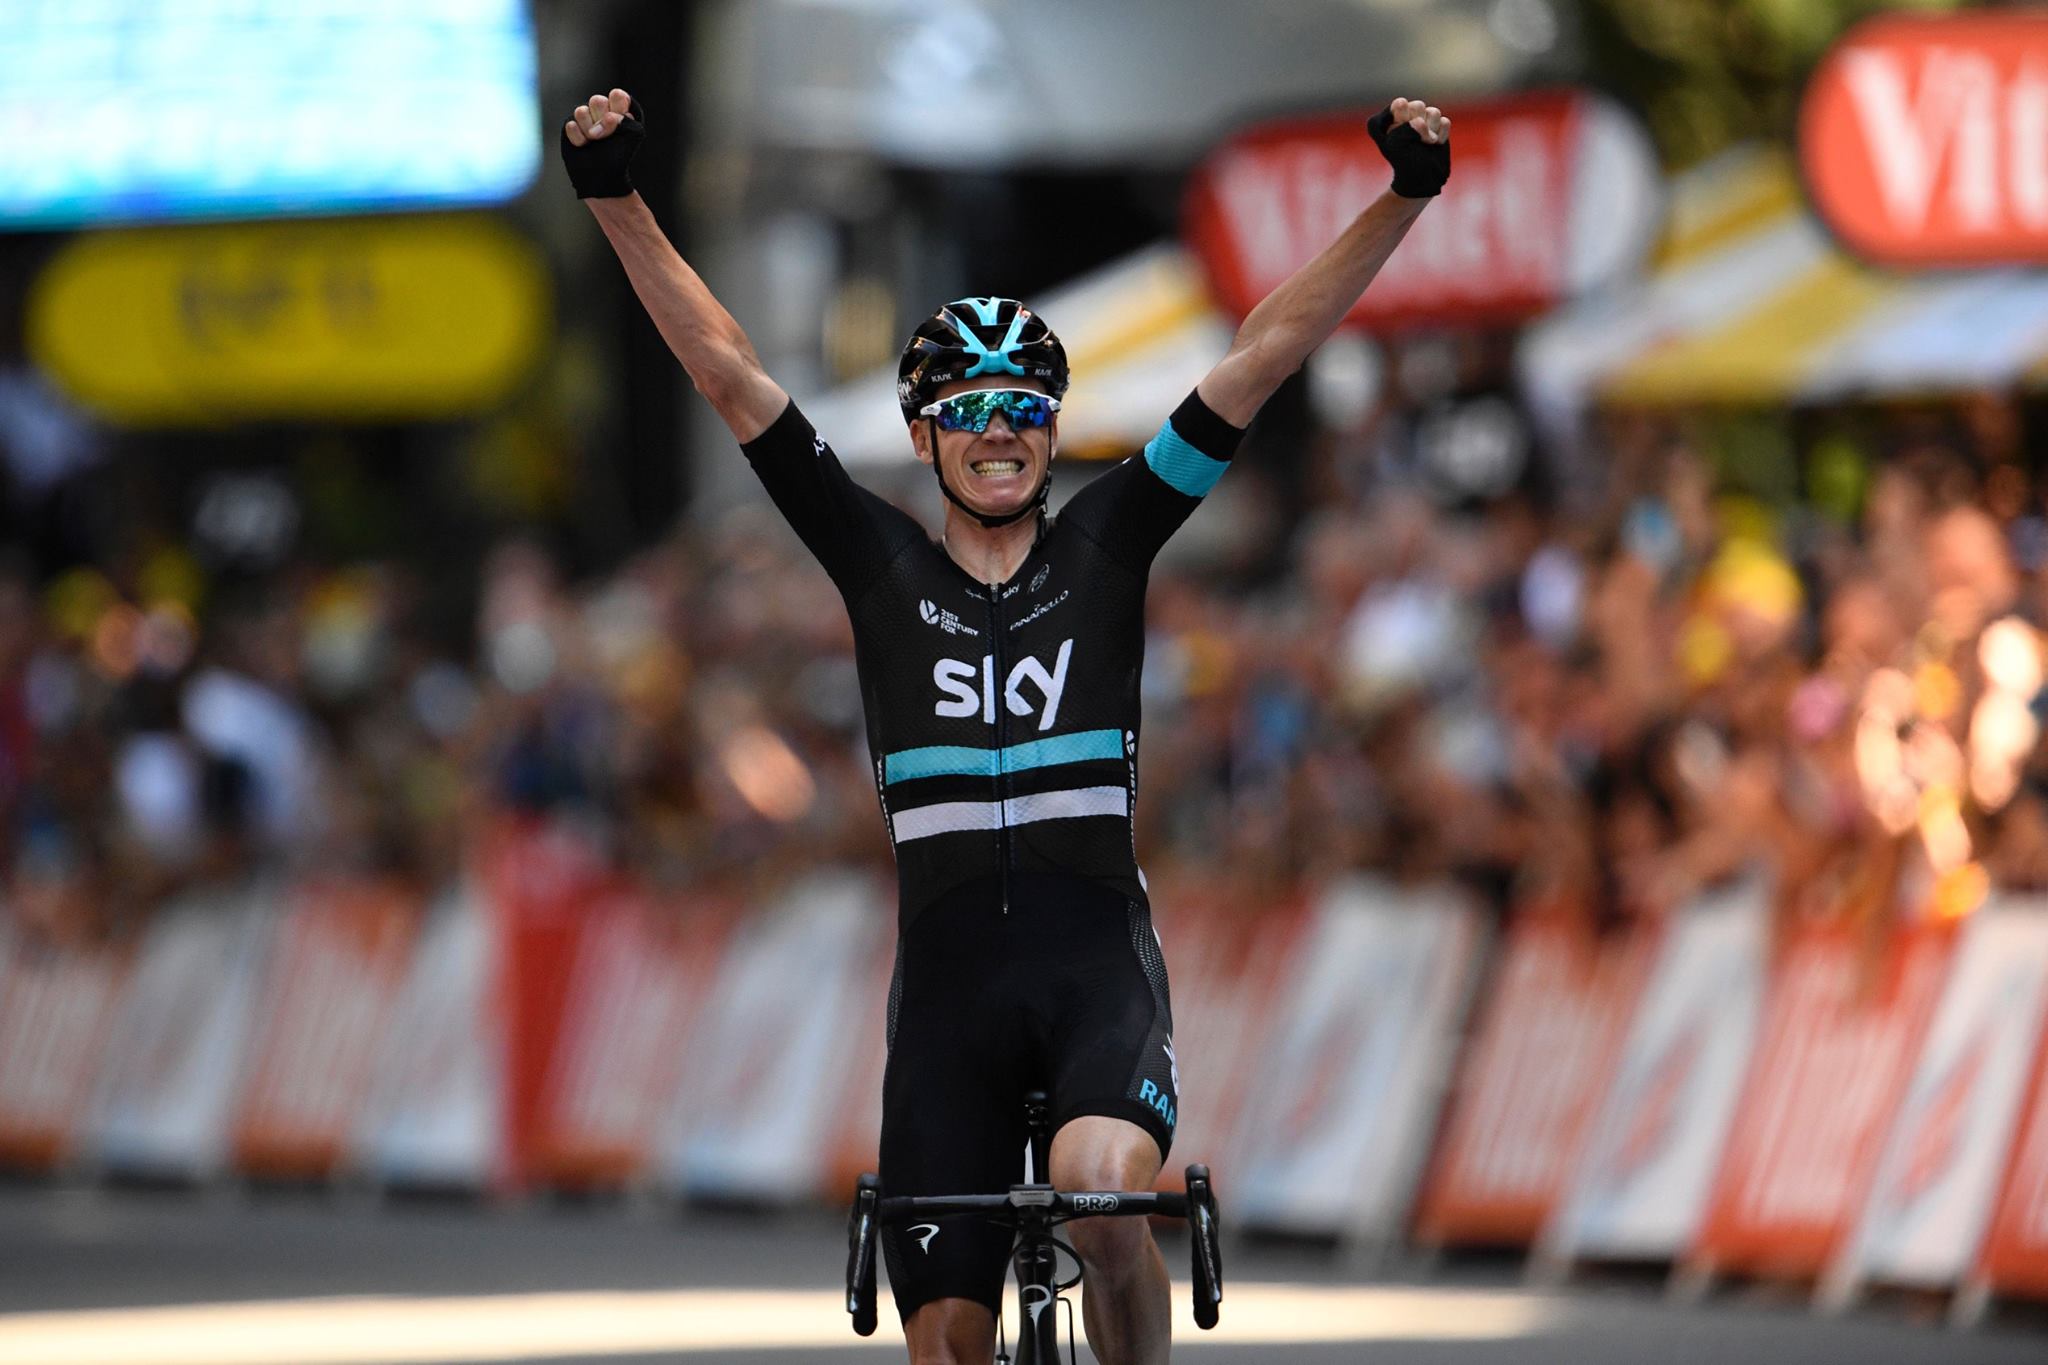 Froome win tdf